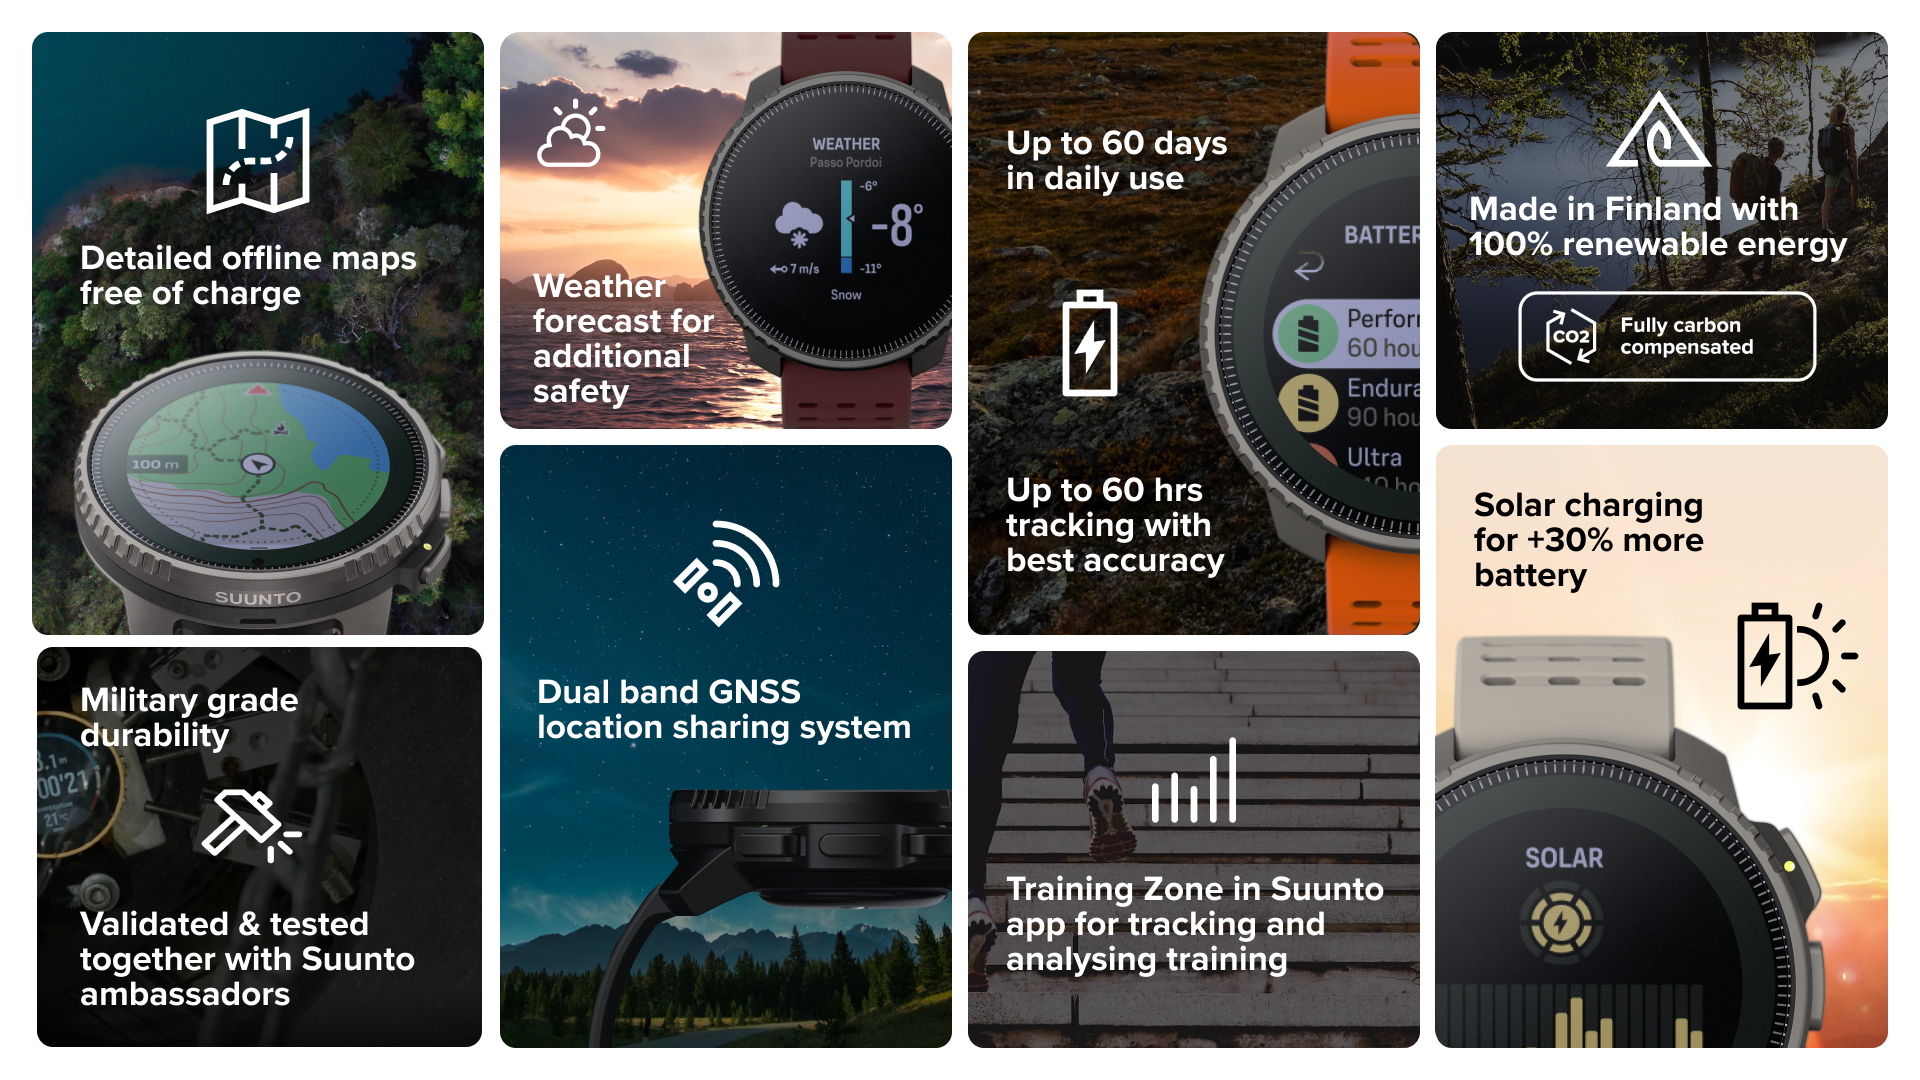 Suunto unveils the new Vertical GPS adventure watch featuring  free offline maps, solar charging & unbeatable battery life